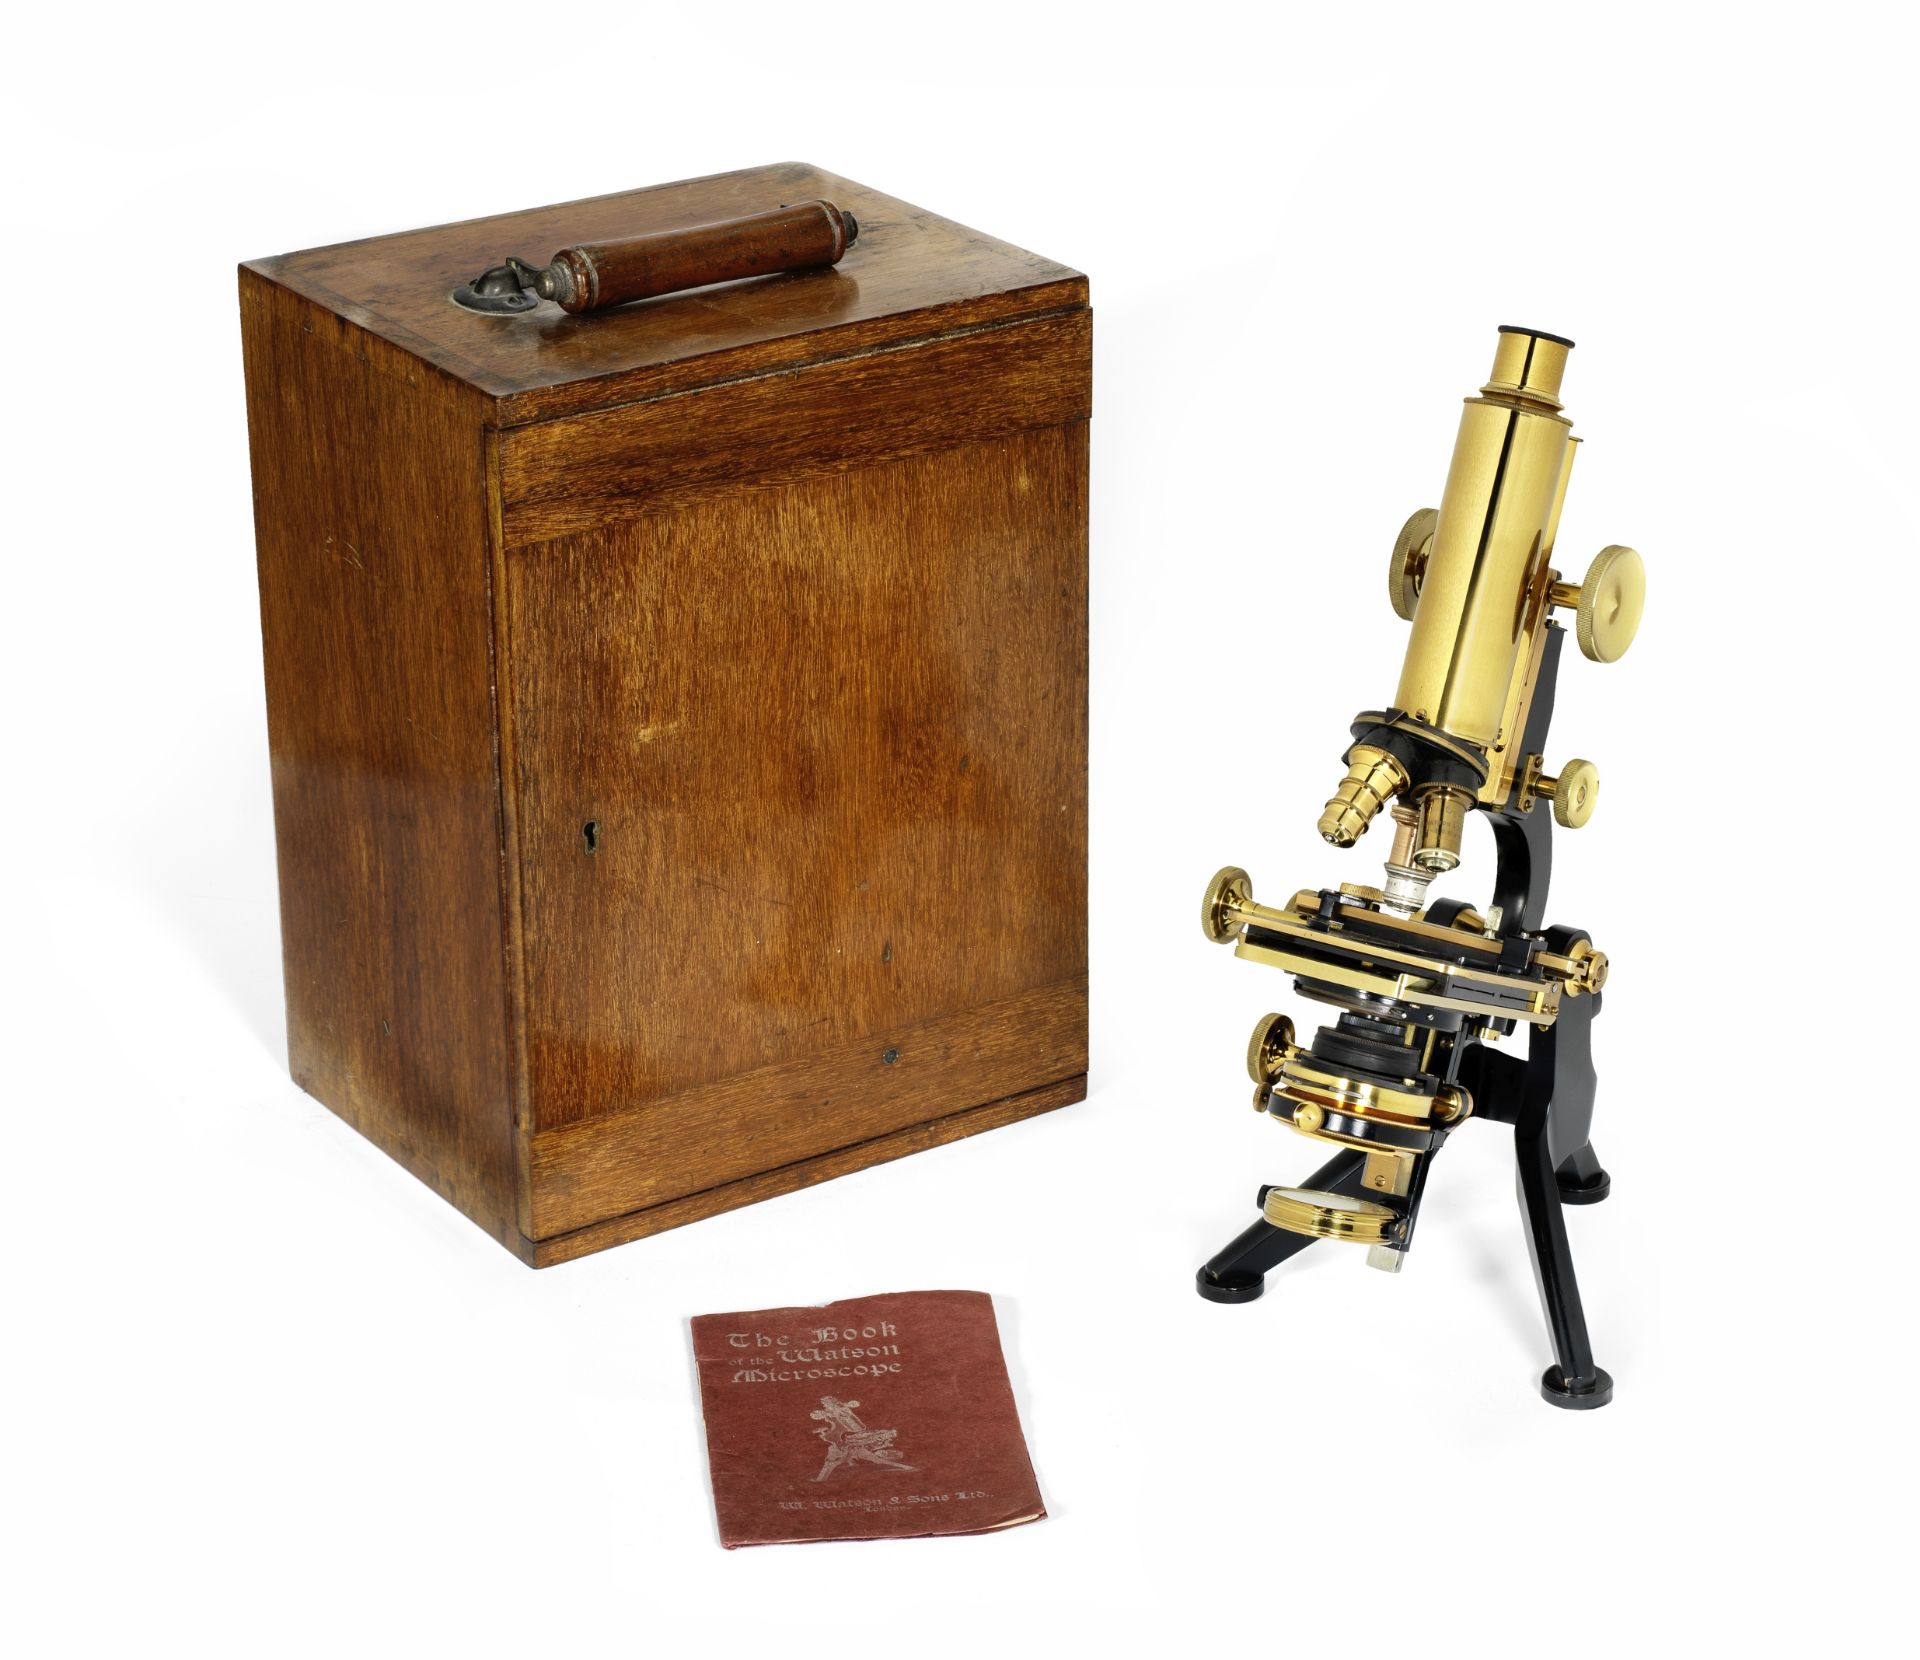 A Watson & Sons compound monocular microscope, English, early 20th century,